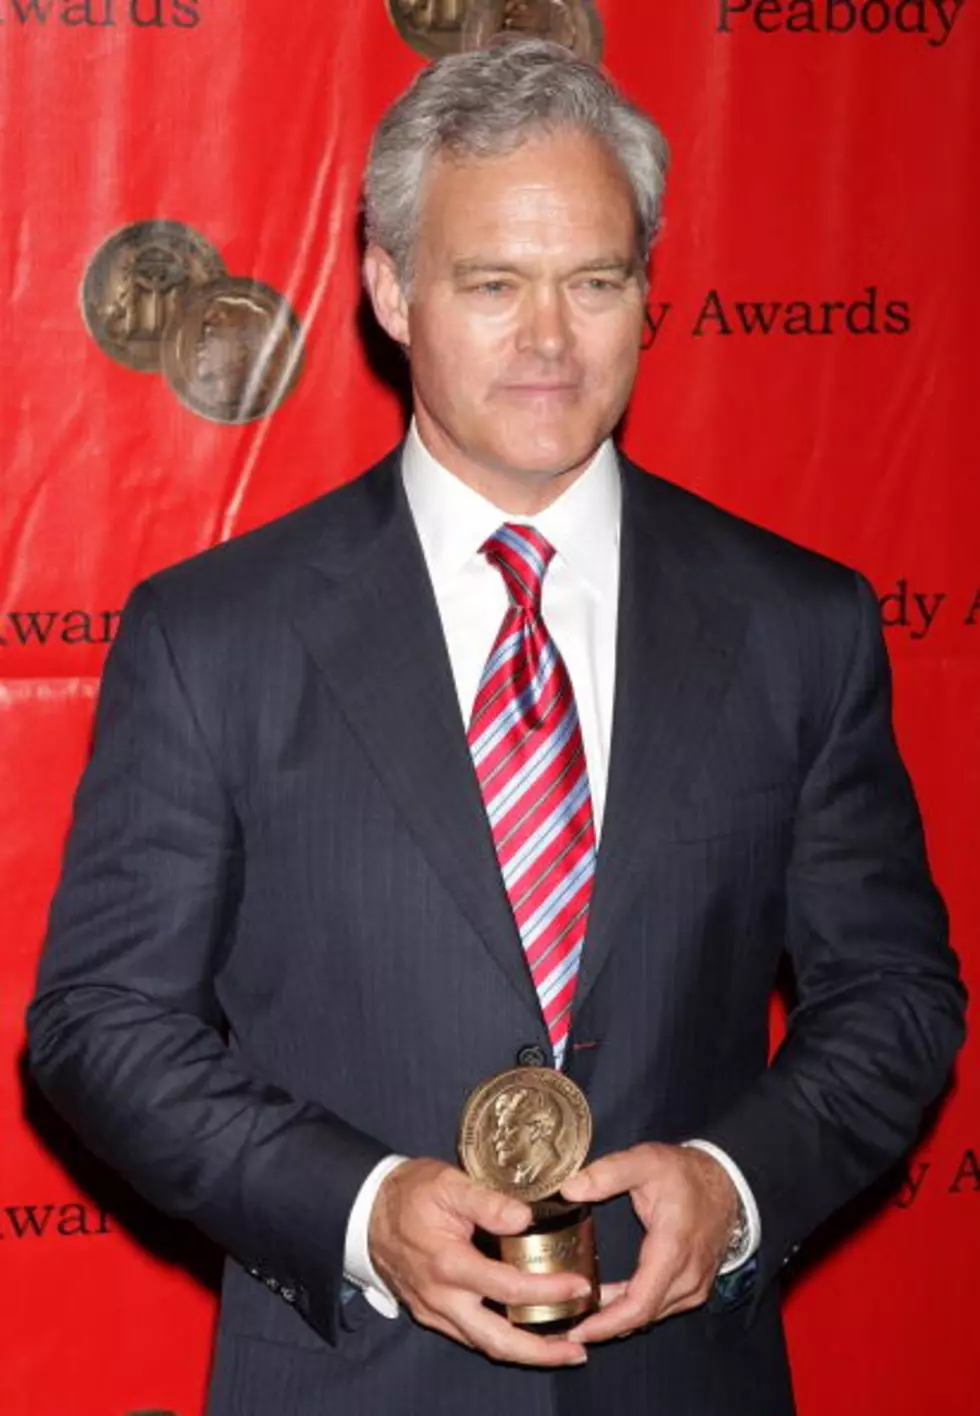 Katie Couric Out &#8212; Scott Pelley In At CBS